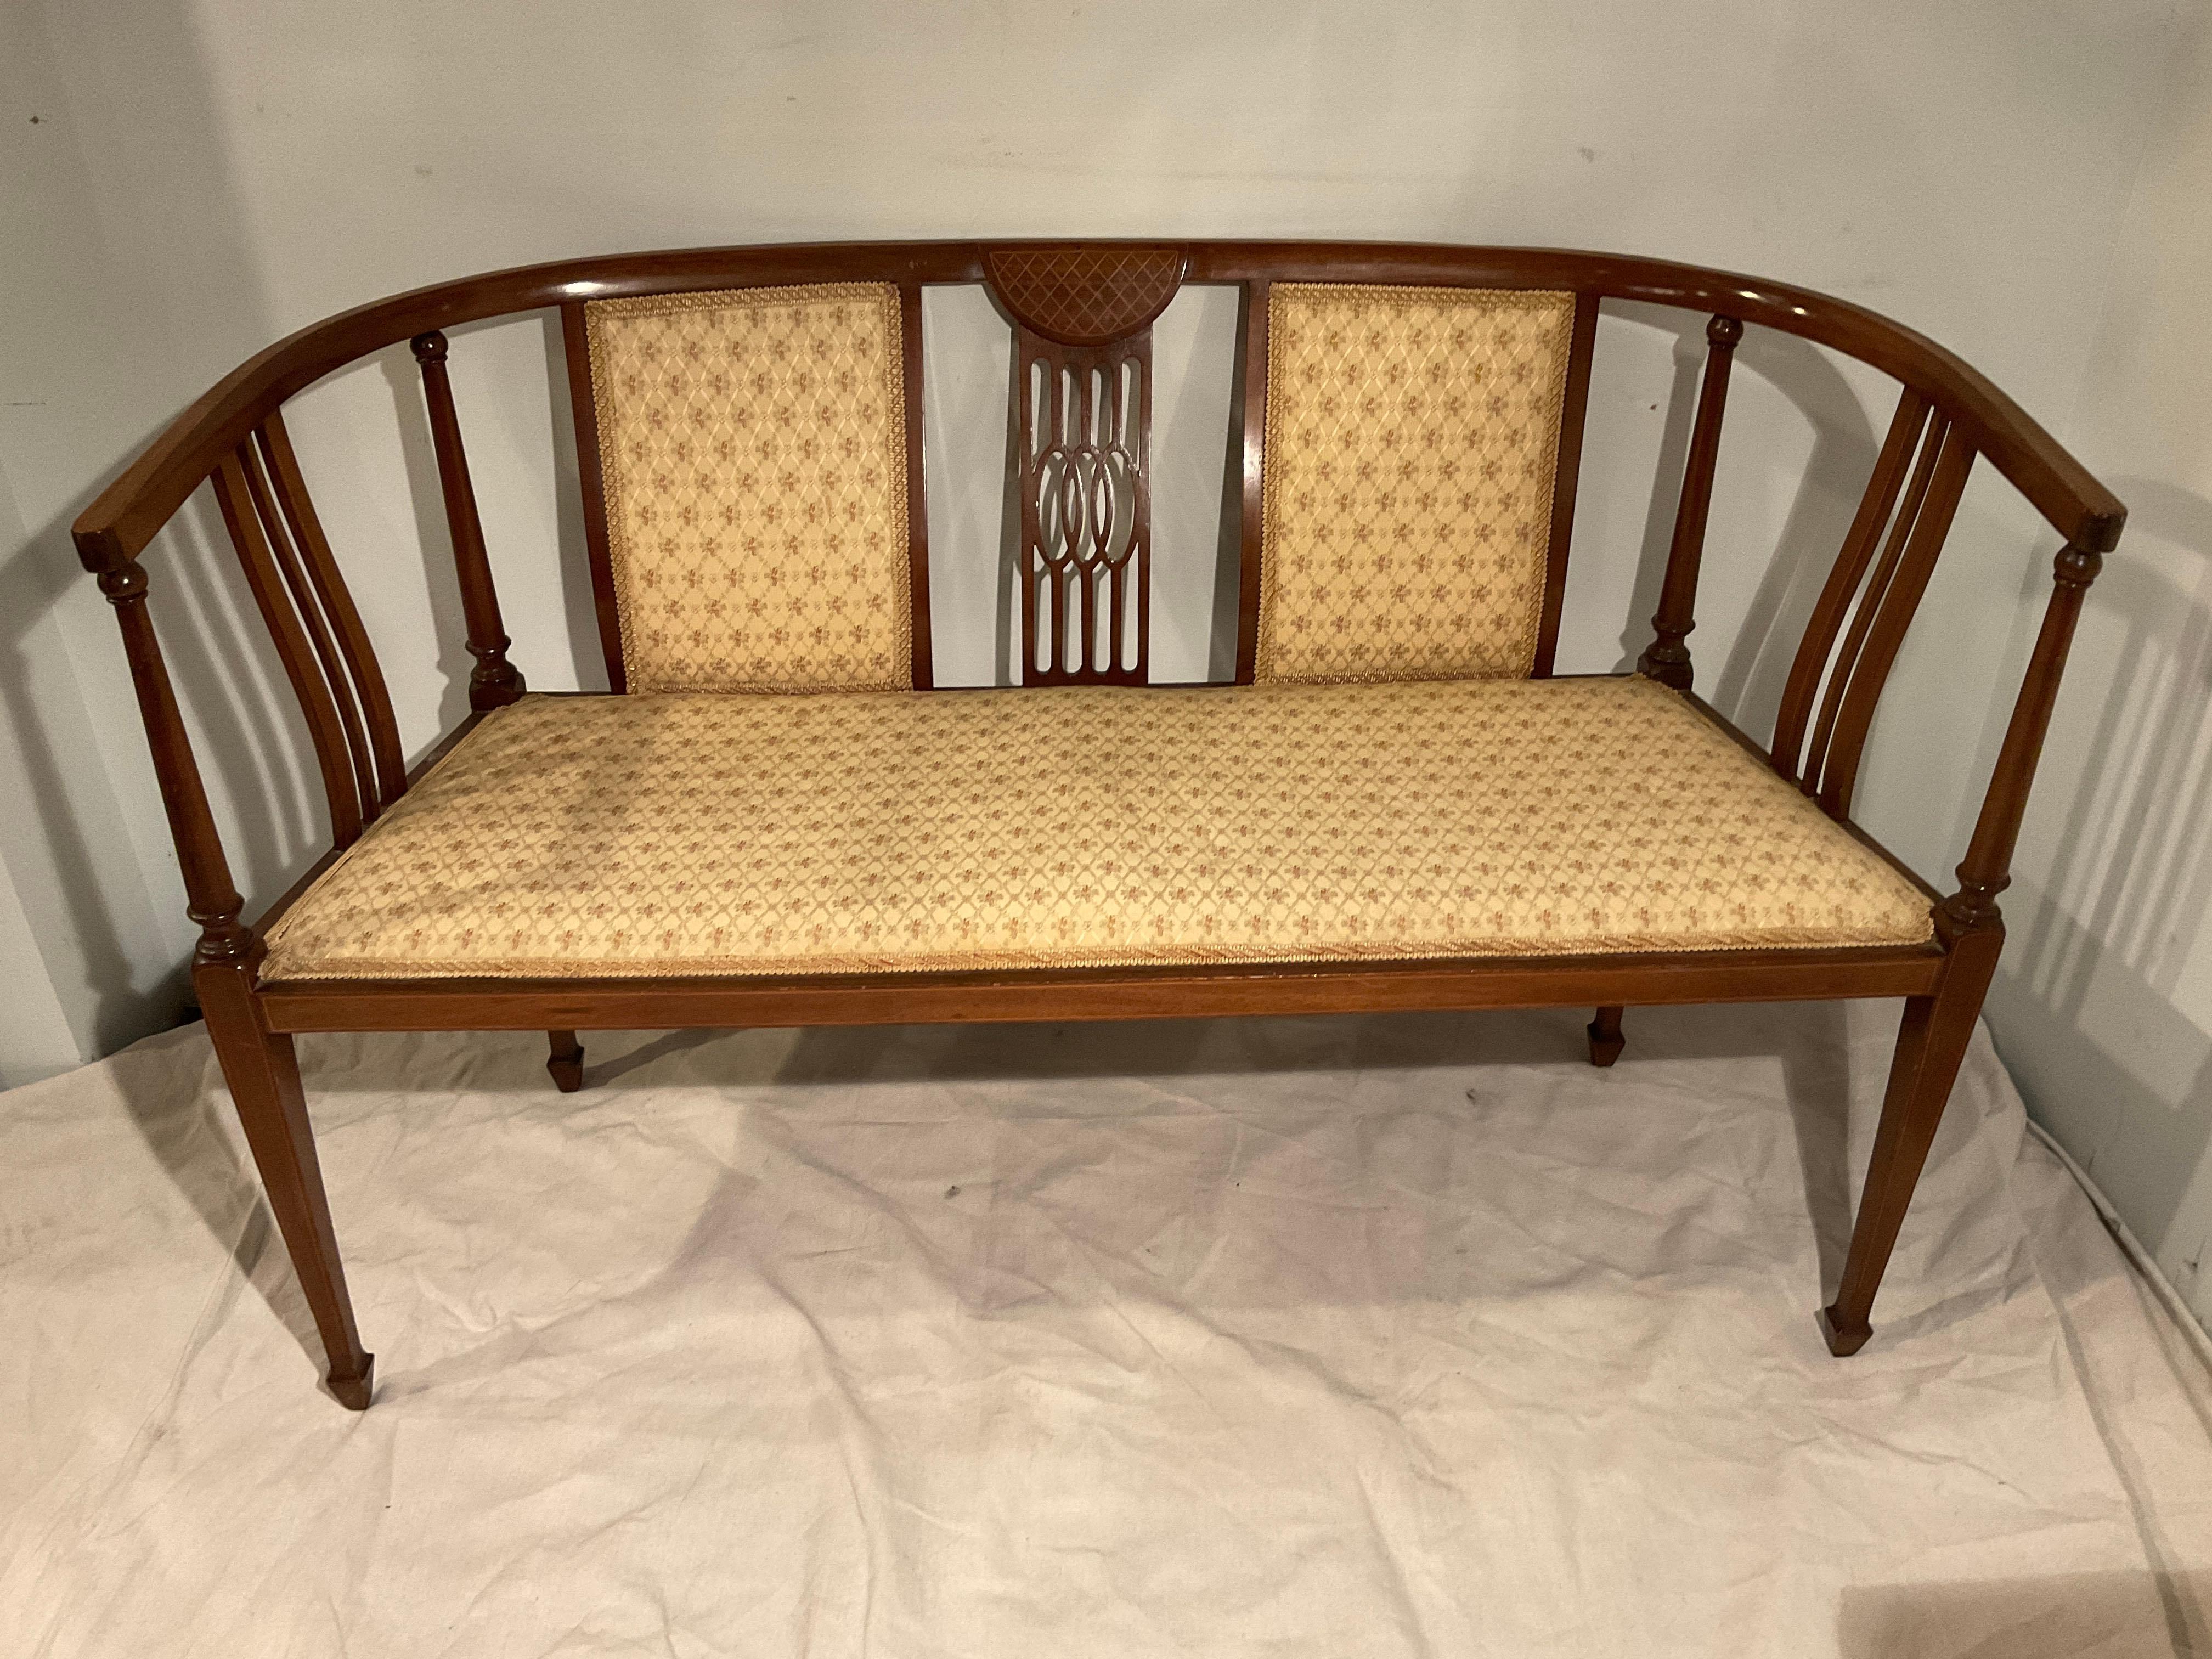 1910 Art Nouveau  inlay settee. Some marks in the finish.